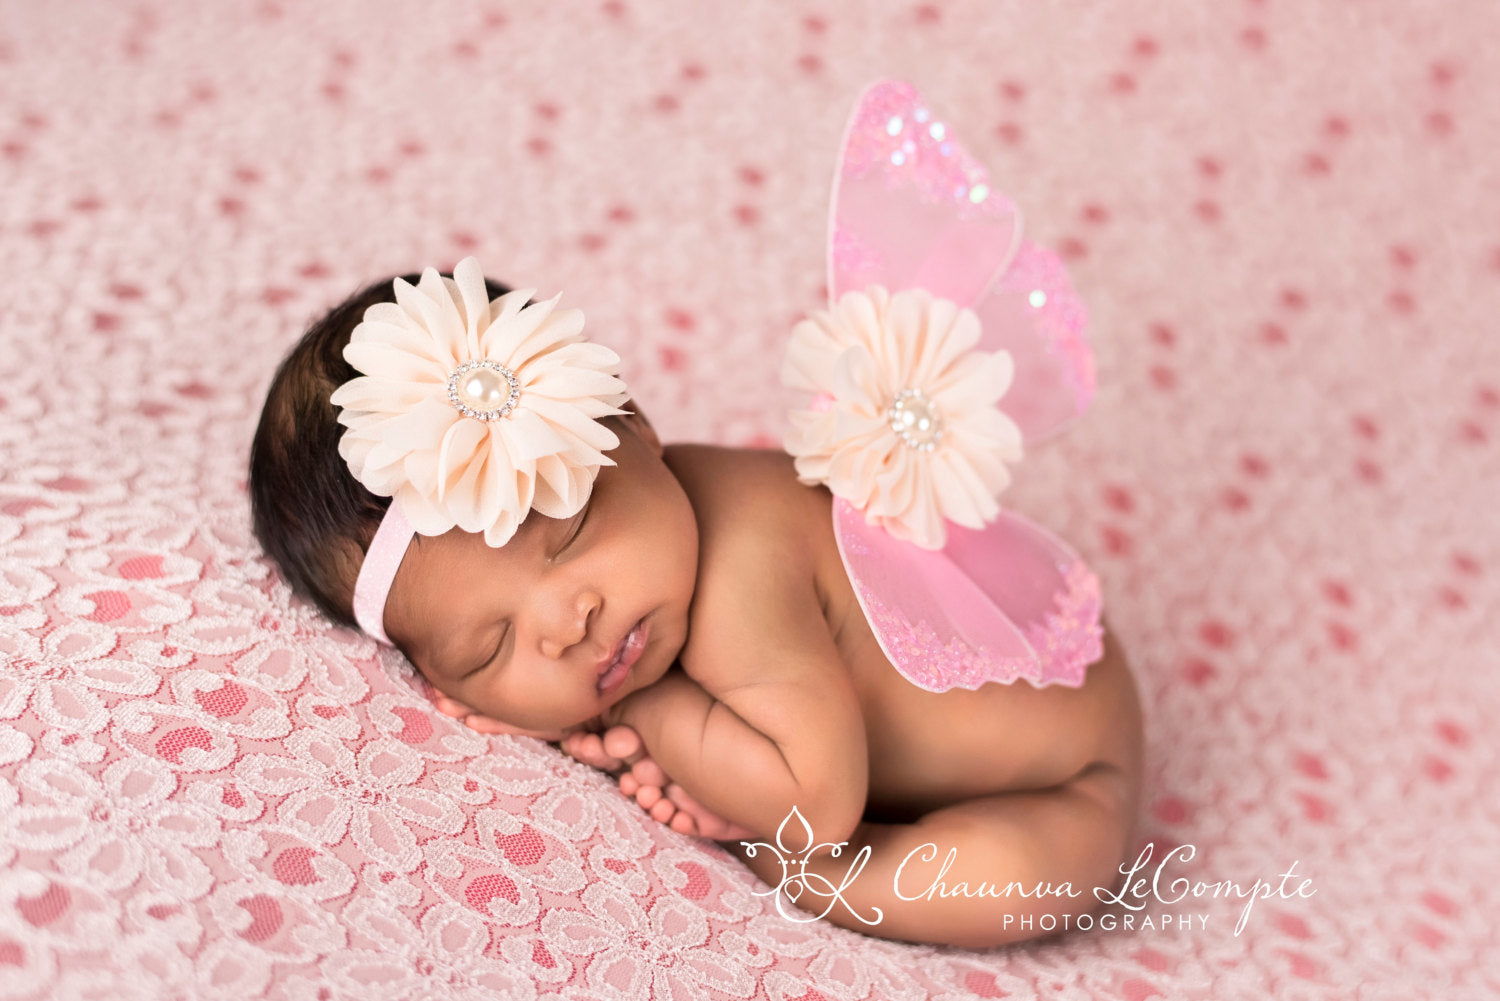 Pink and Ivory Butterfly Wing Set